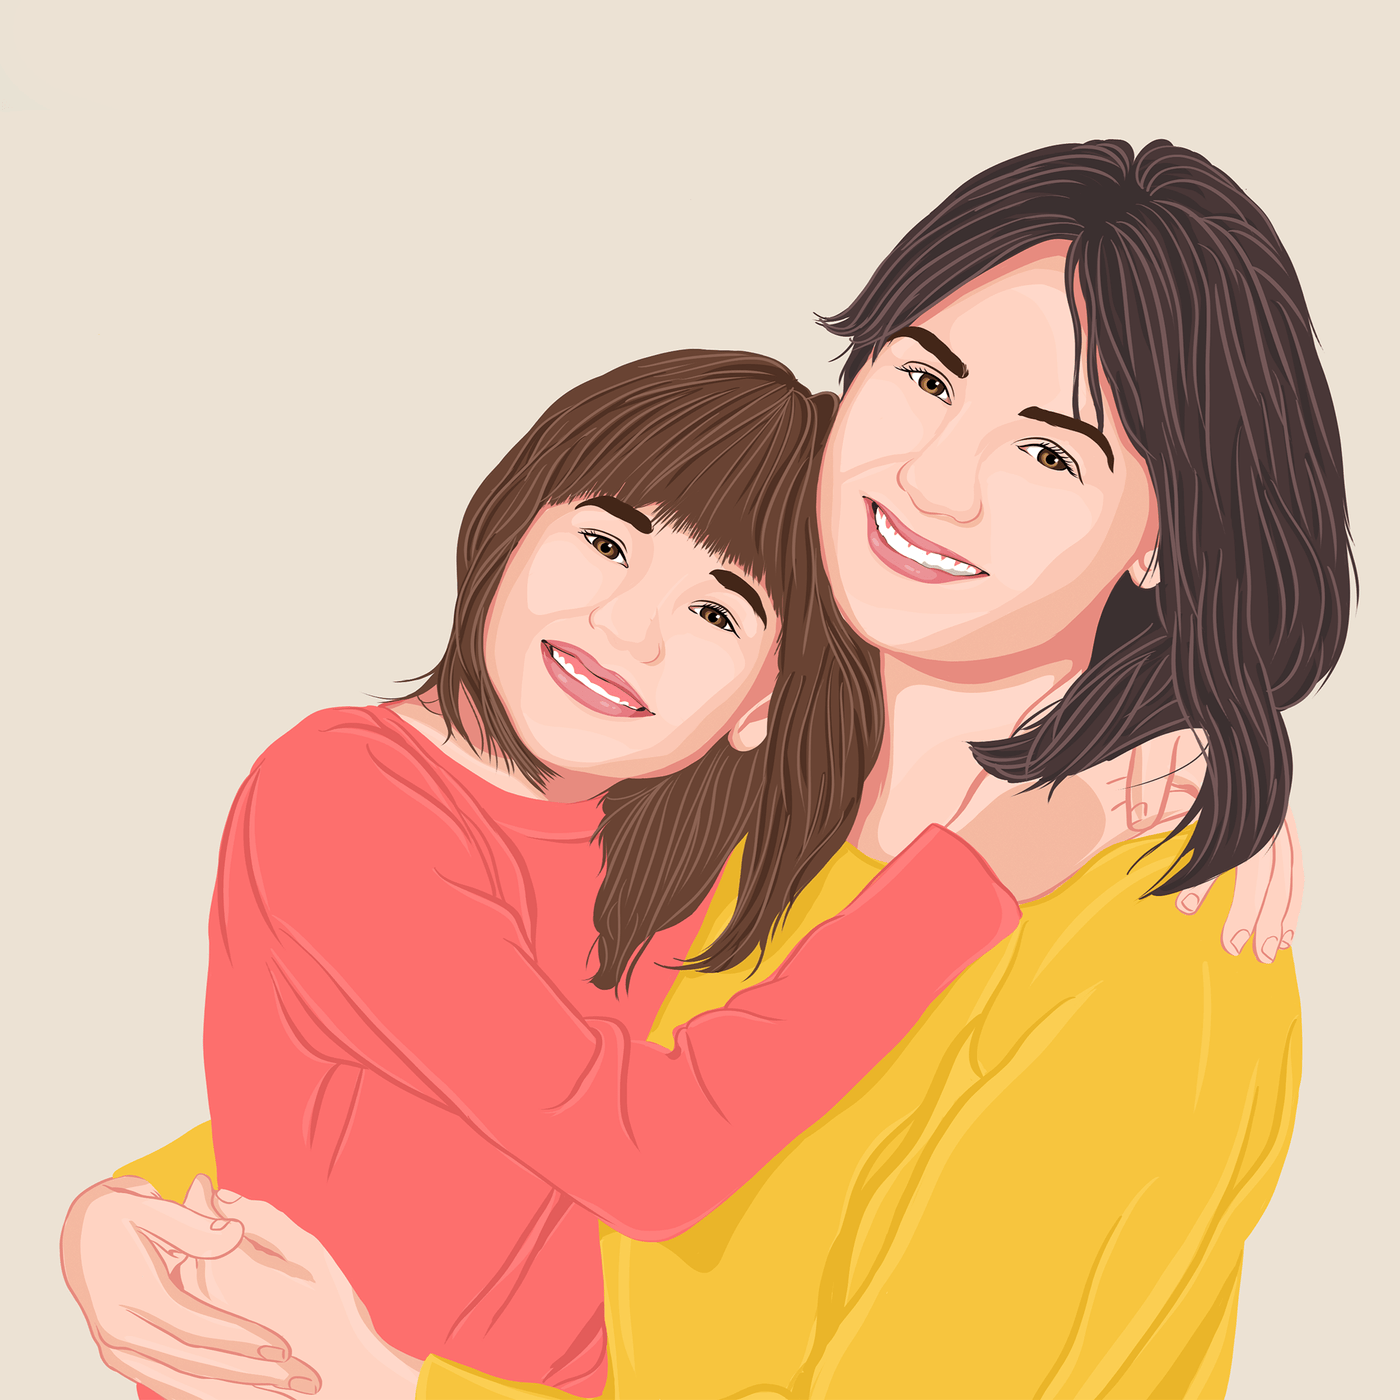 mother vector art of a mom with her daughter